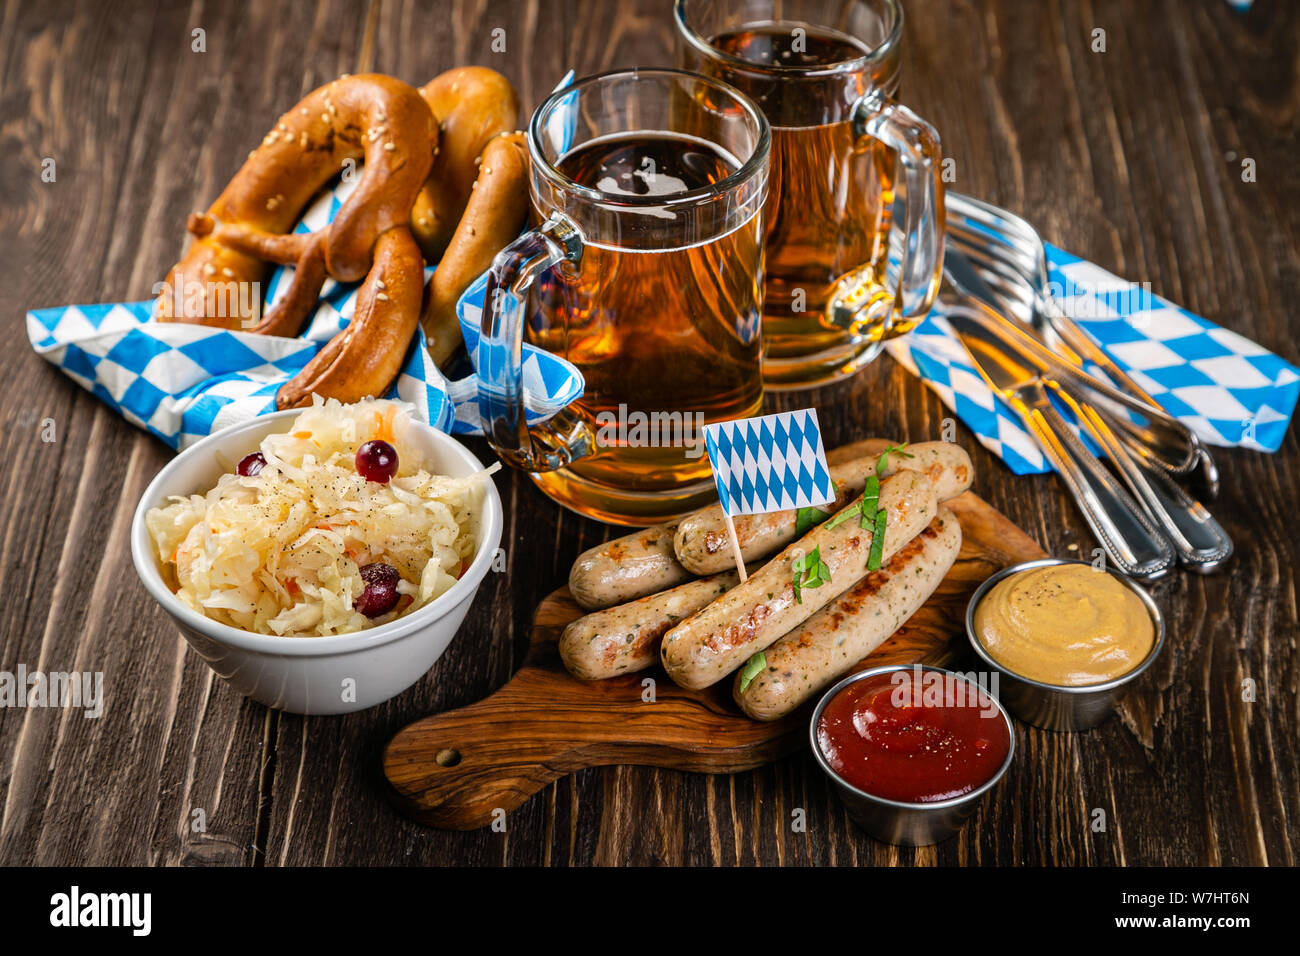 October fest concept - traditional food and beer served at event Stock Photo